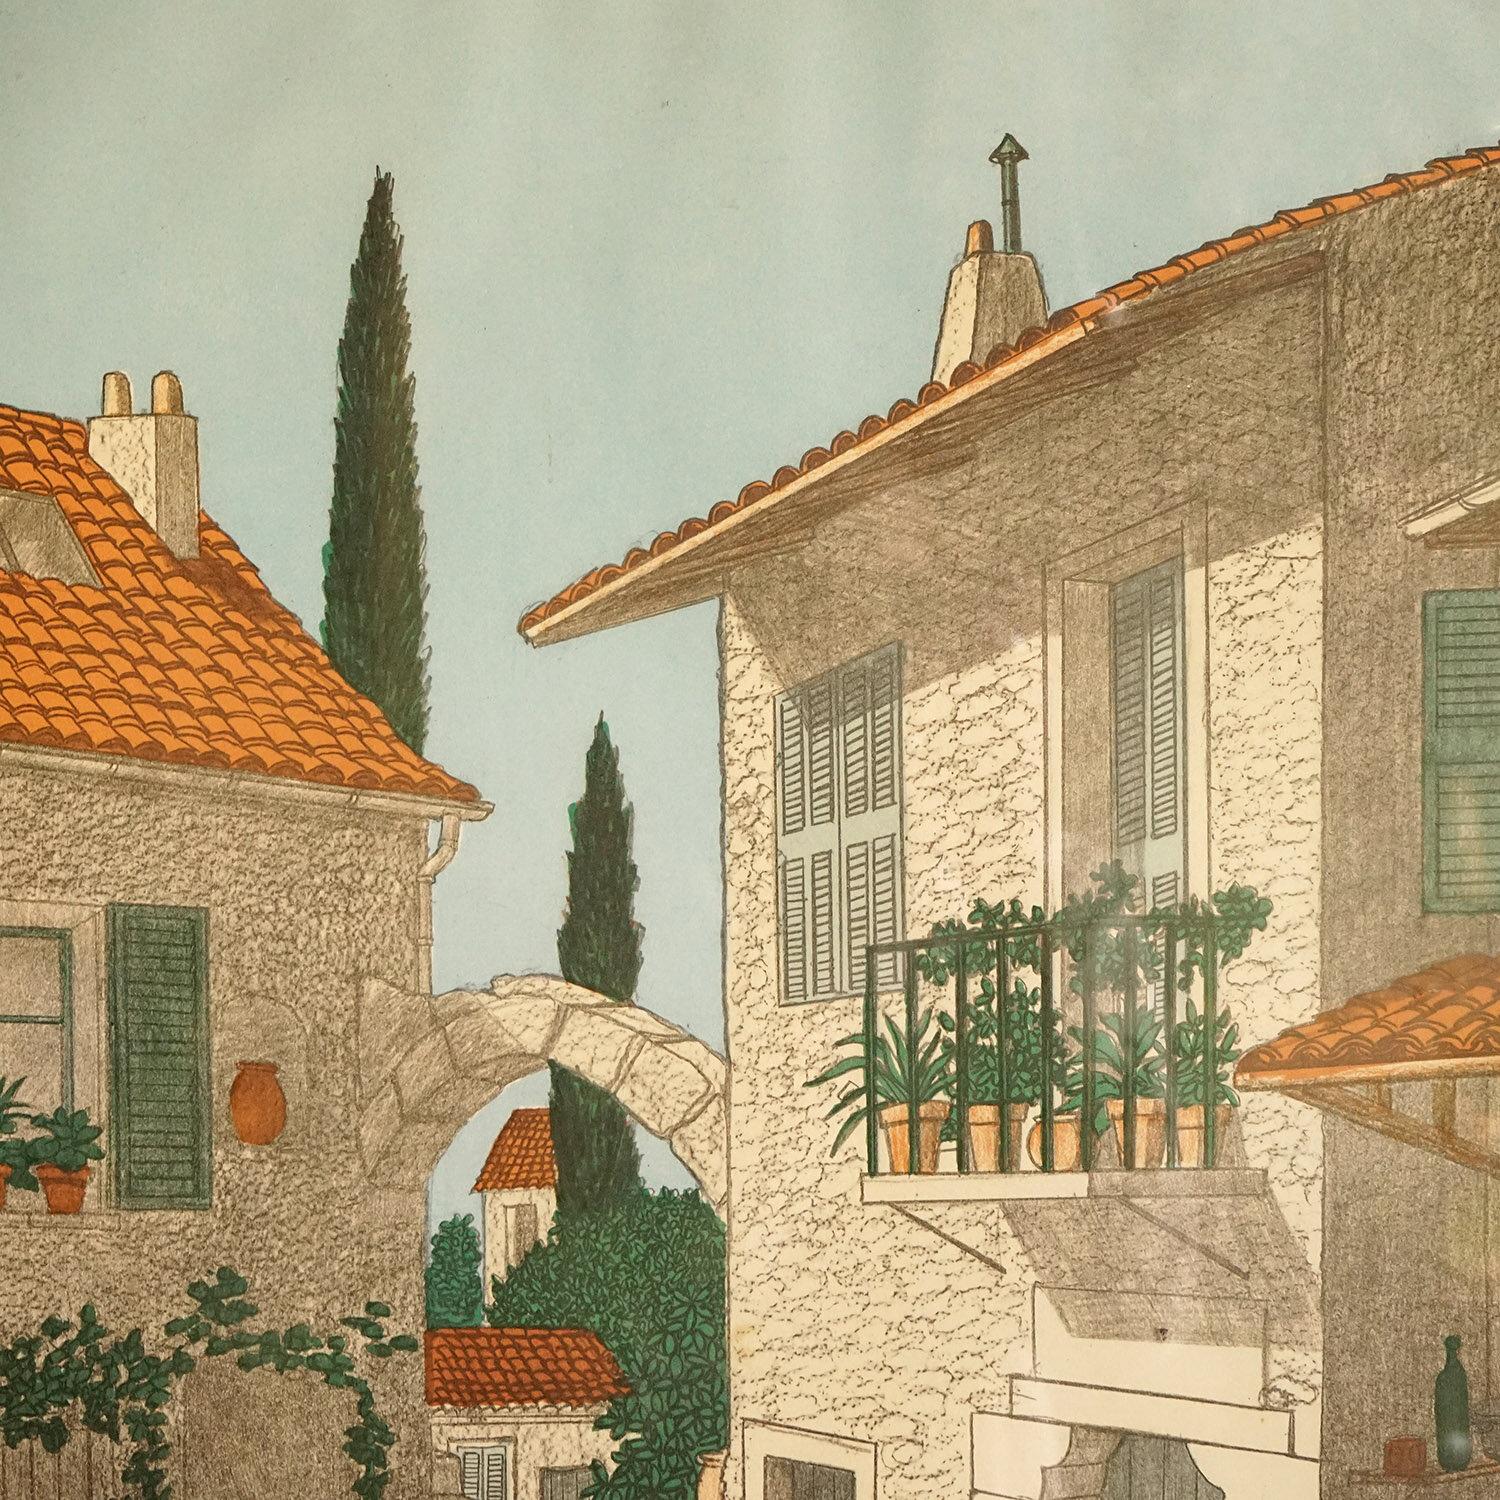 Mediterranean Village Scene By Denis Paul Noyer, Vintage Signed Lithograph 1970s In Good Condition For Sale In Bristol, GB